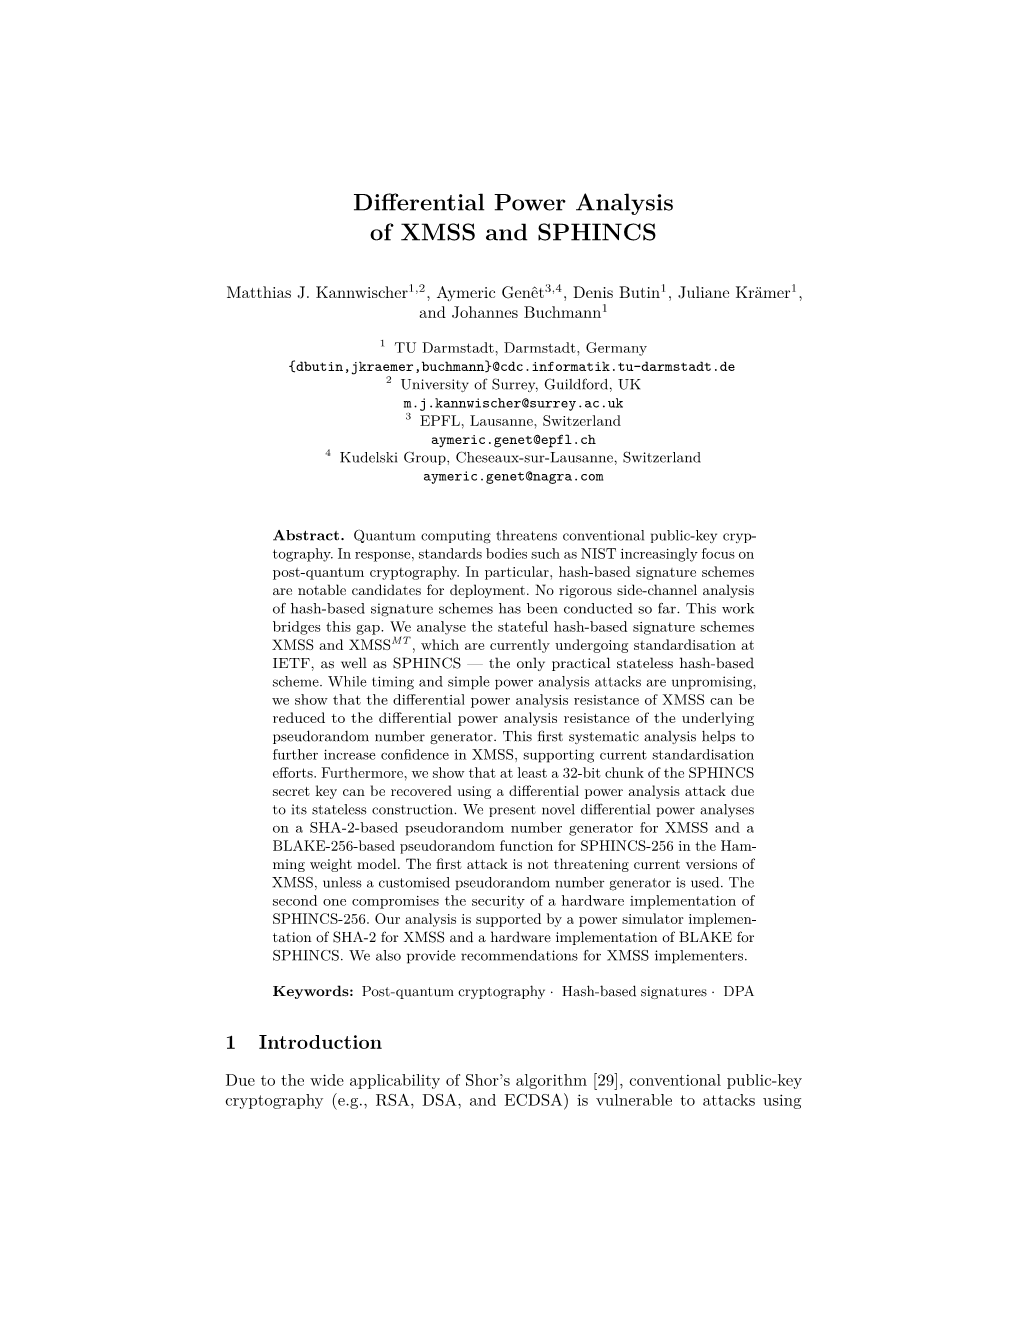 Differential Power Analysis of XMSS and SPHINCS